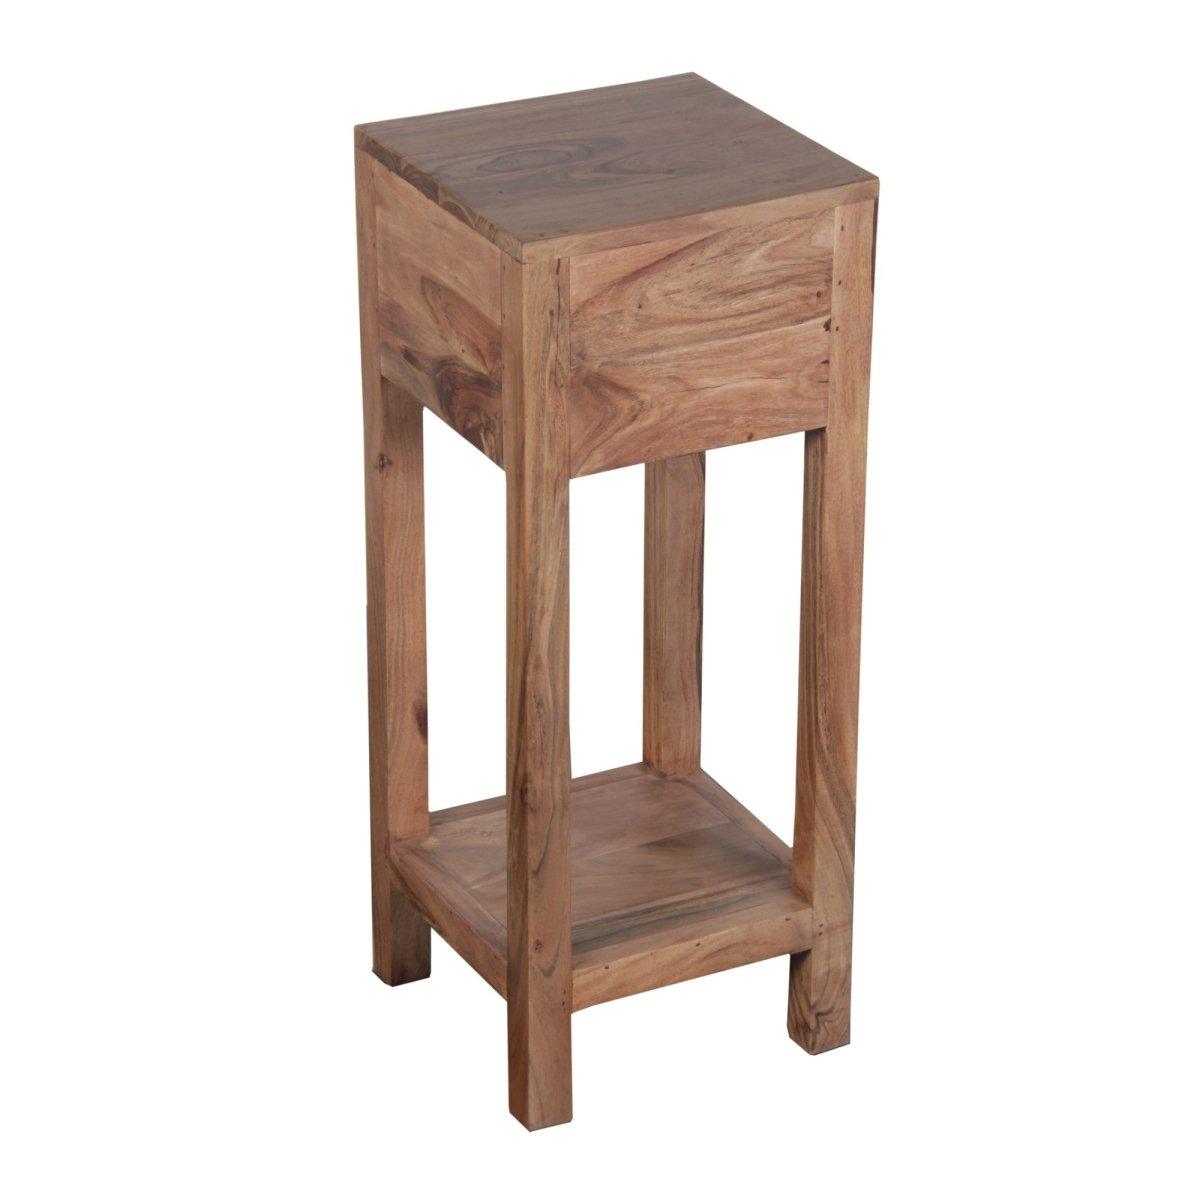 Zen Acacia Wood Tall Telephone end table - Rustic Furniture Outlet